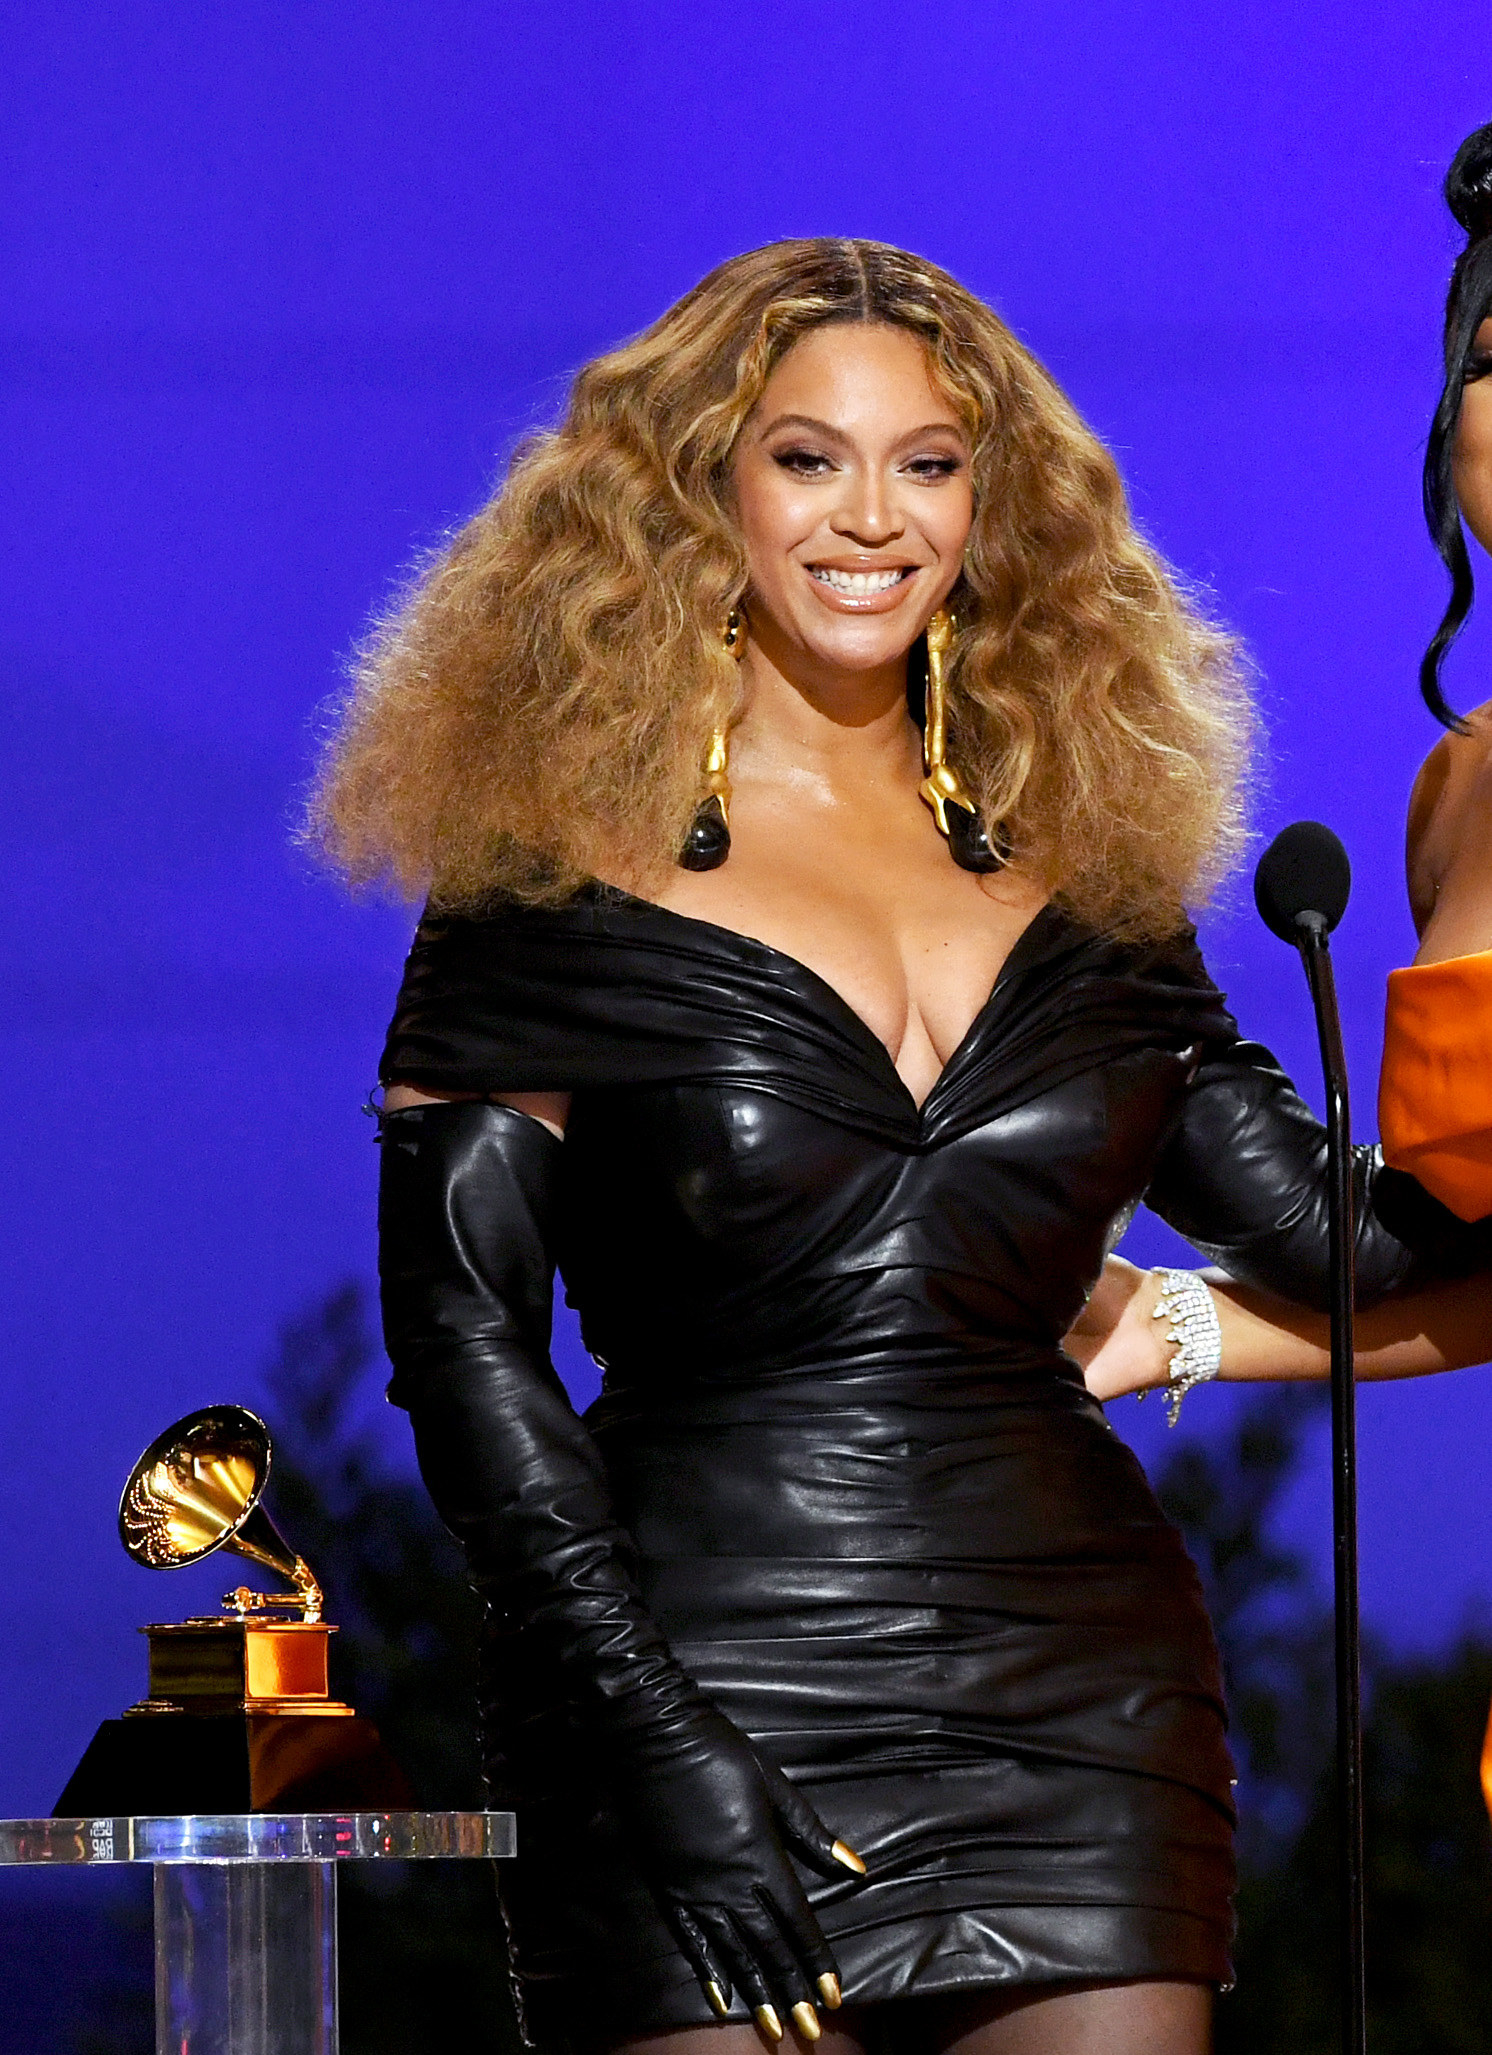 Beyoncé at the Grammy Awards in 2021